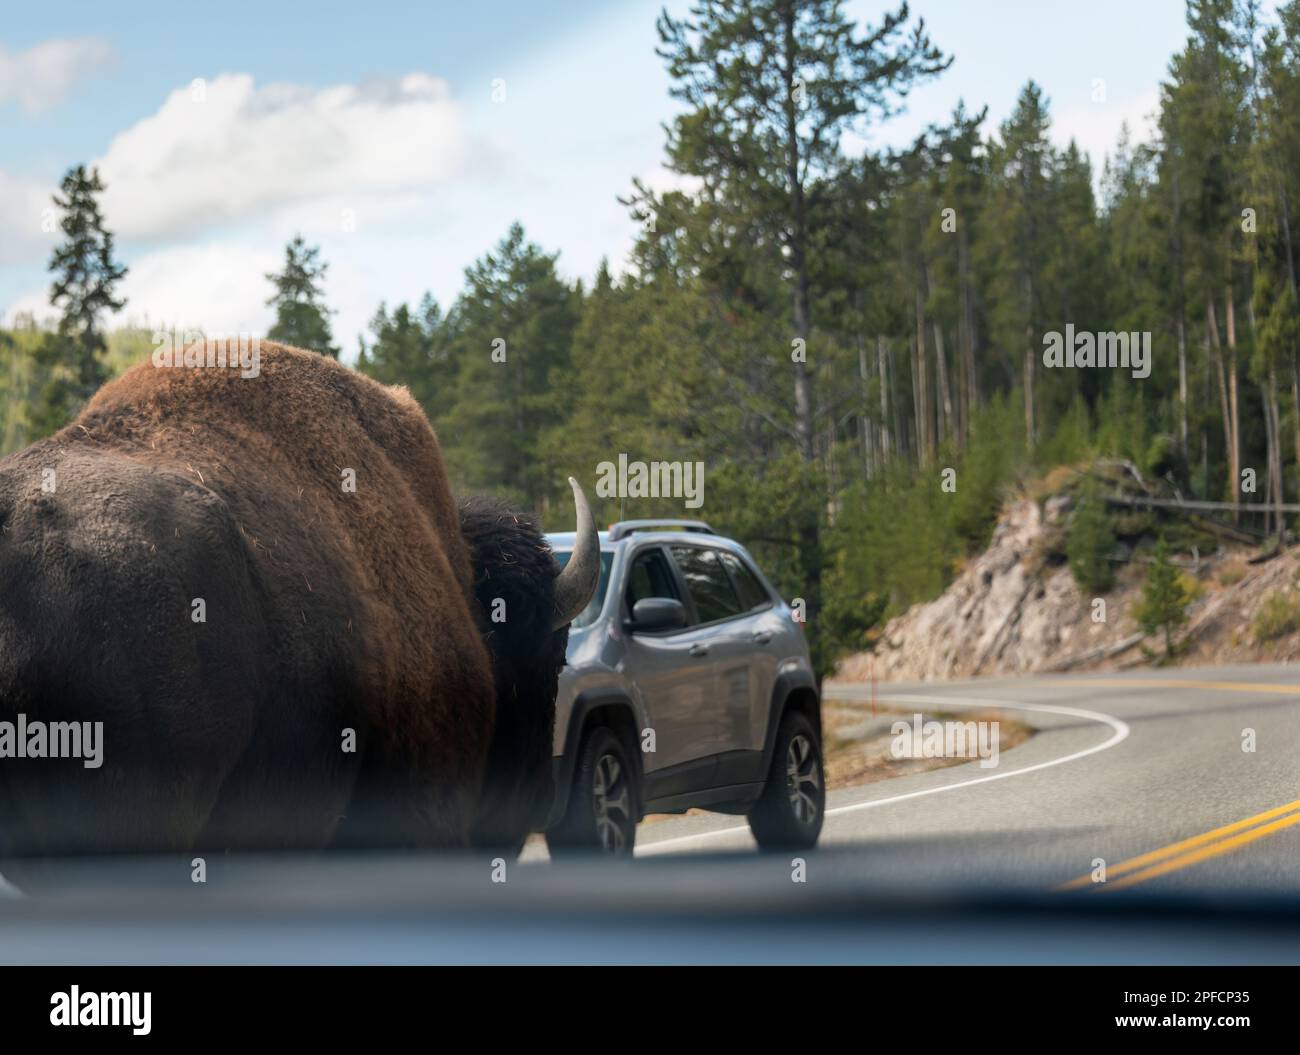 A big bull bison walking on highway, stopping traffic. Image taken inside the car. Yellowstone National Park. United States. Stock Photo